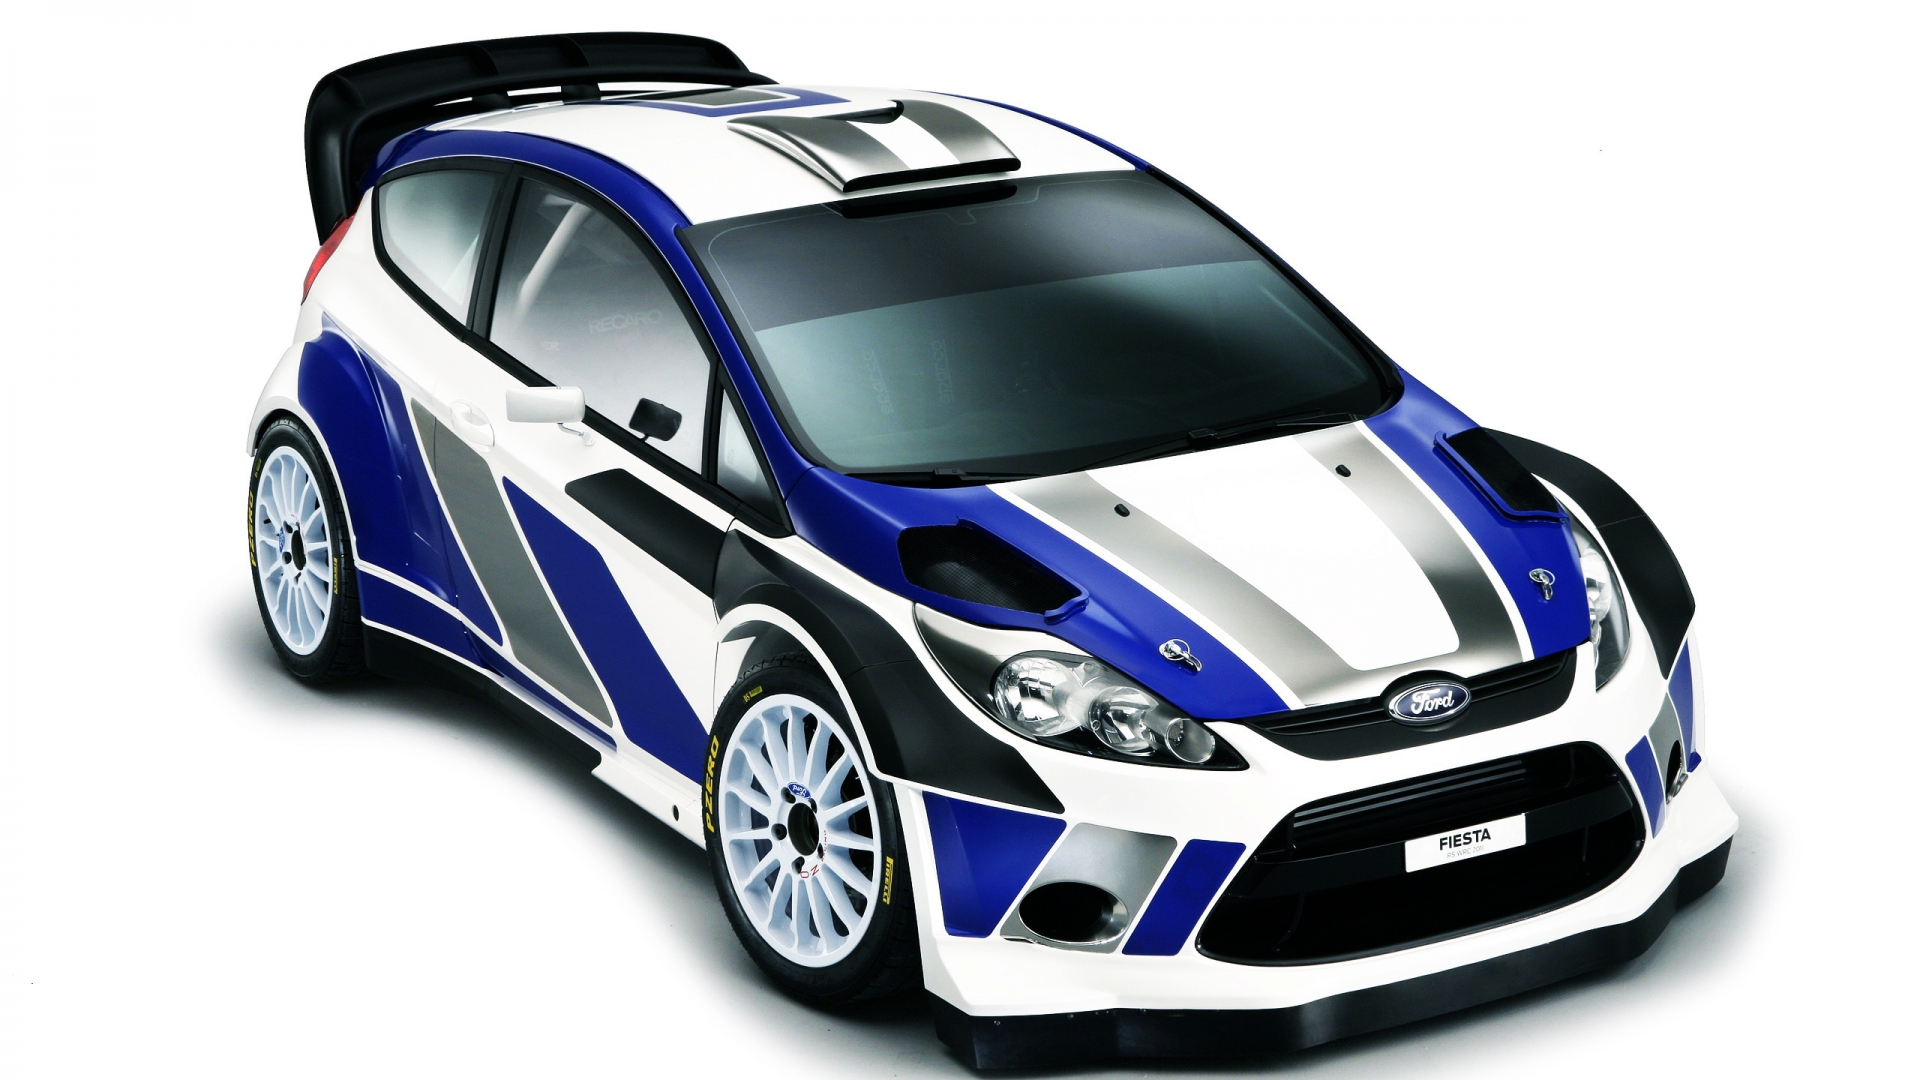 Ford Fiesta WRC 2011 for 1920 x 1080 HDTV 1080p resolution